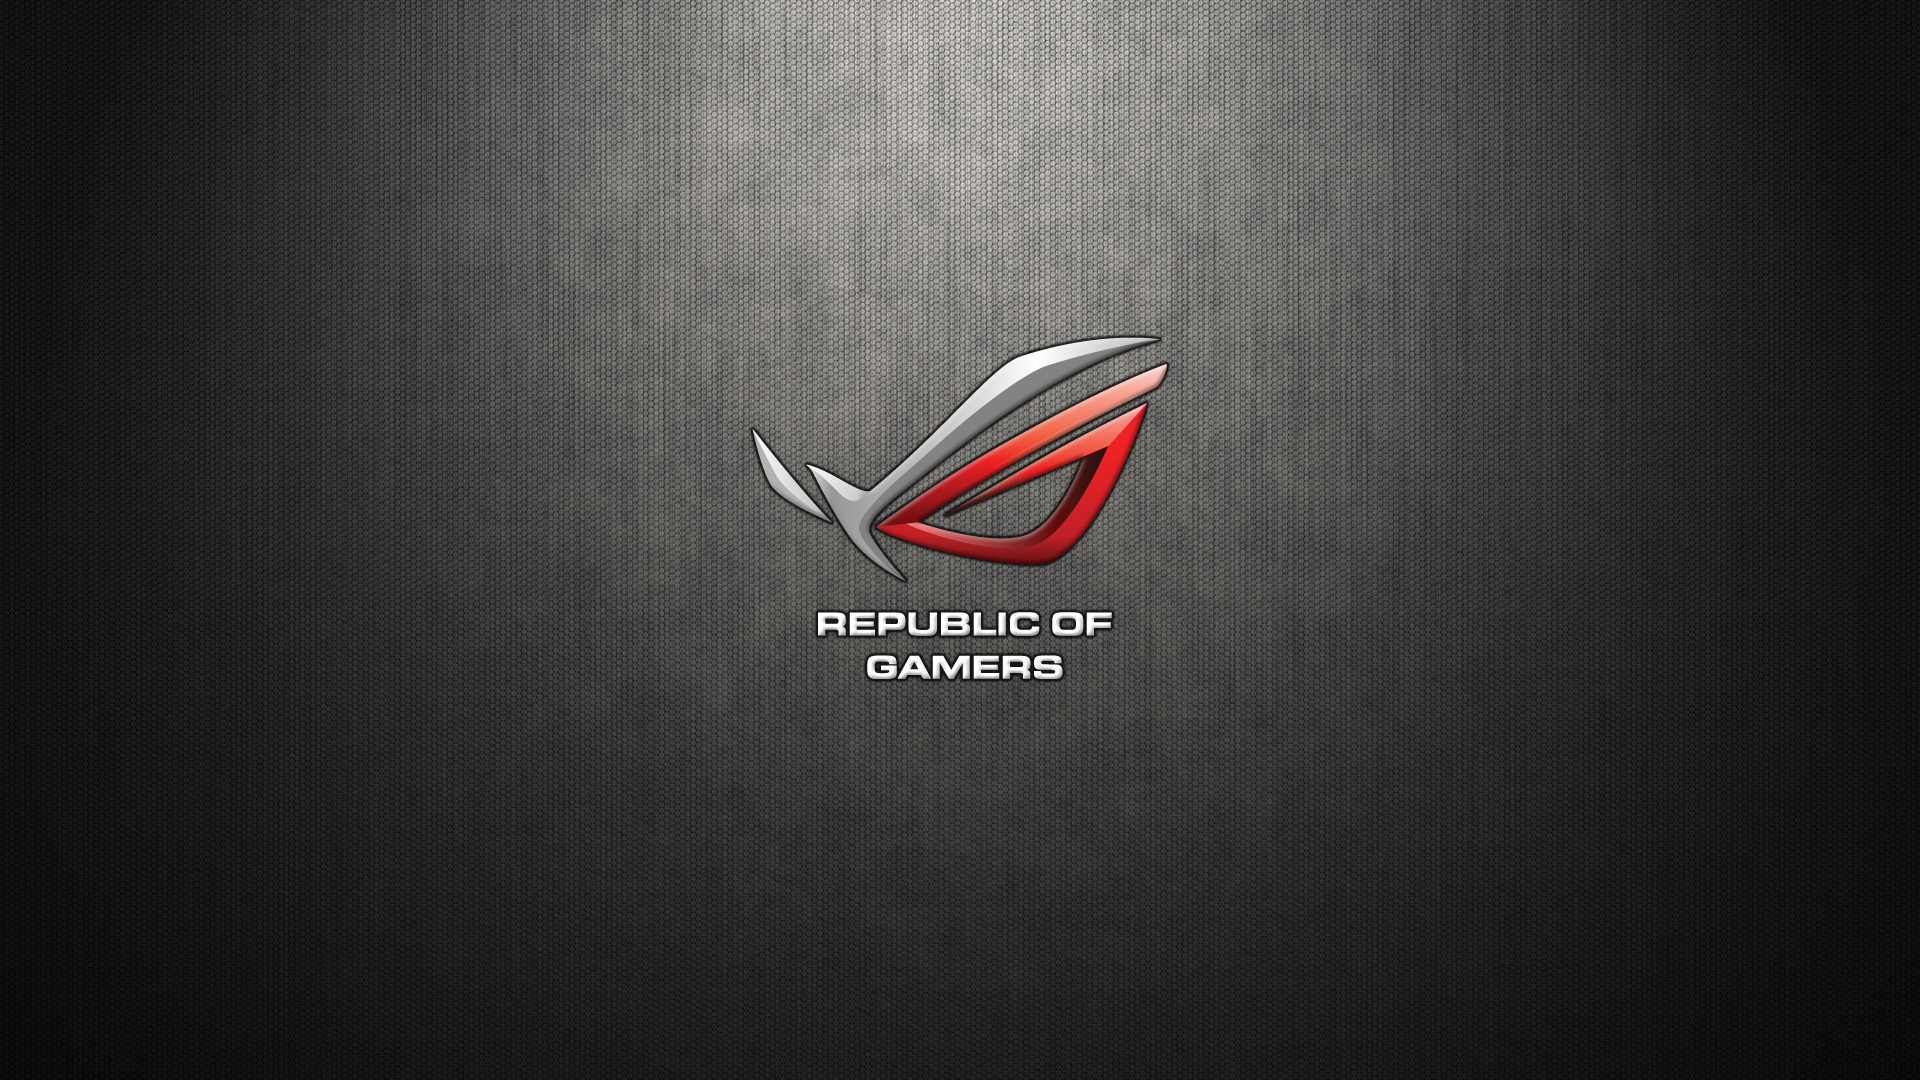 Images of Asus ROG | 1920x1080